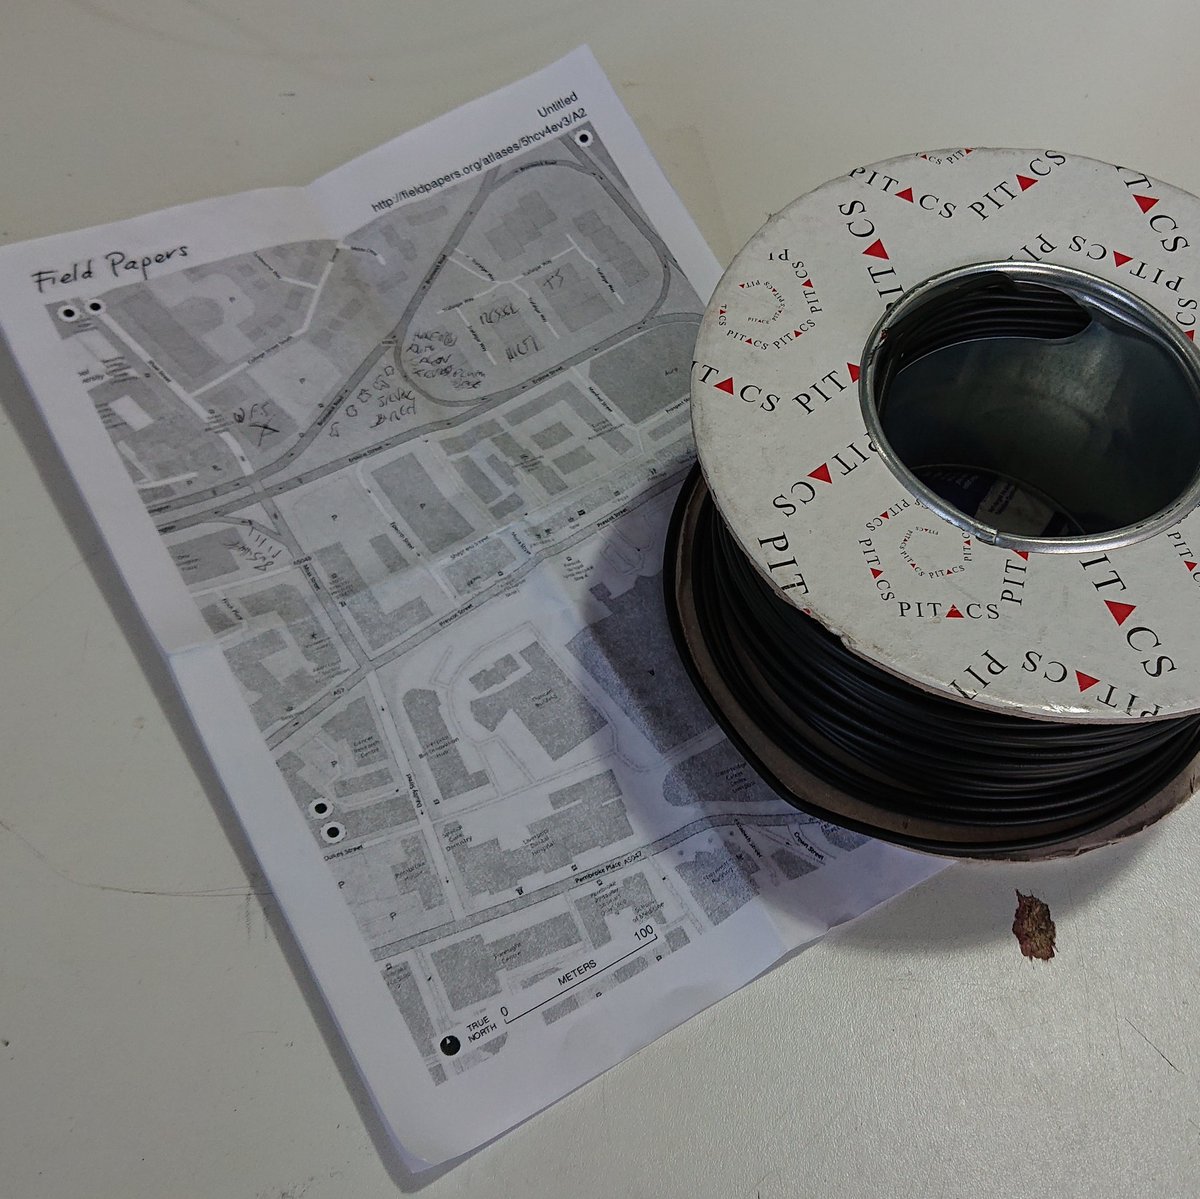 A reel of electrical wire, next to a print out of a map marked up with hand-written notes